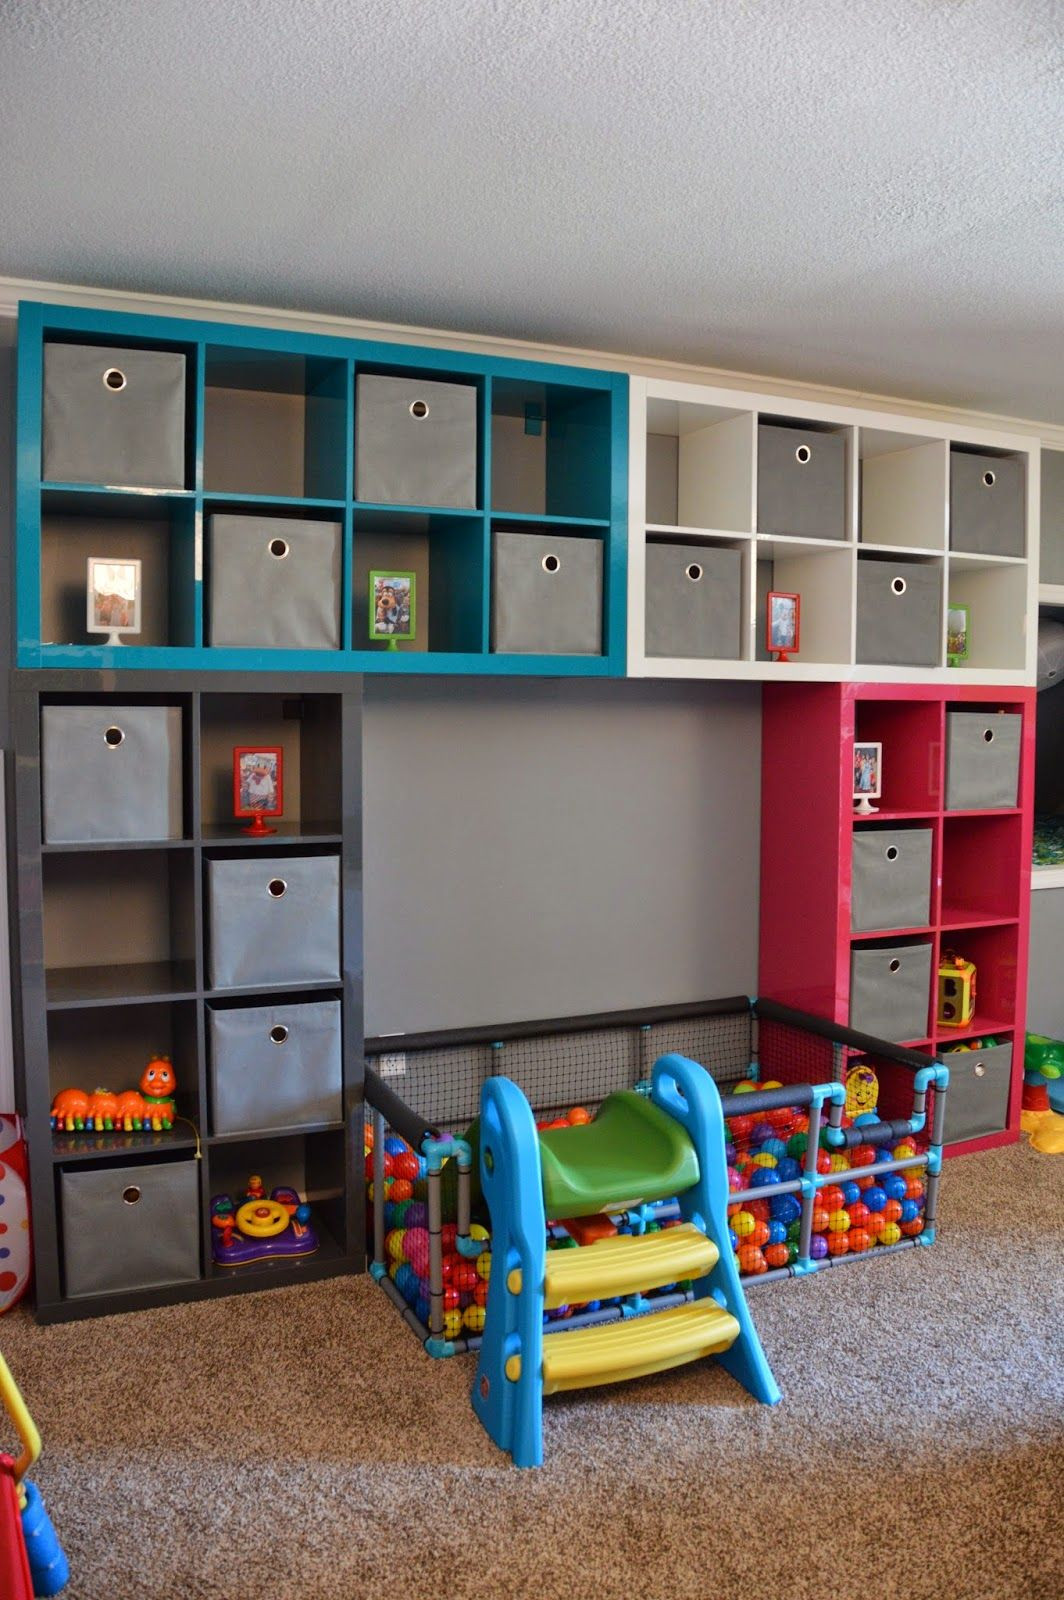 DIY Toy Storage Plans
 7 1 Toy Storage Ideas DIY Plans In A Small Space [Your